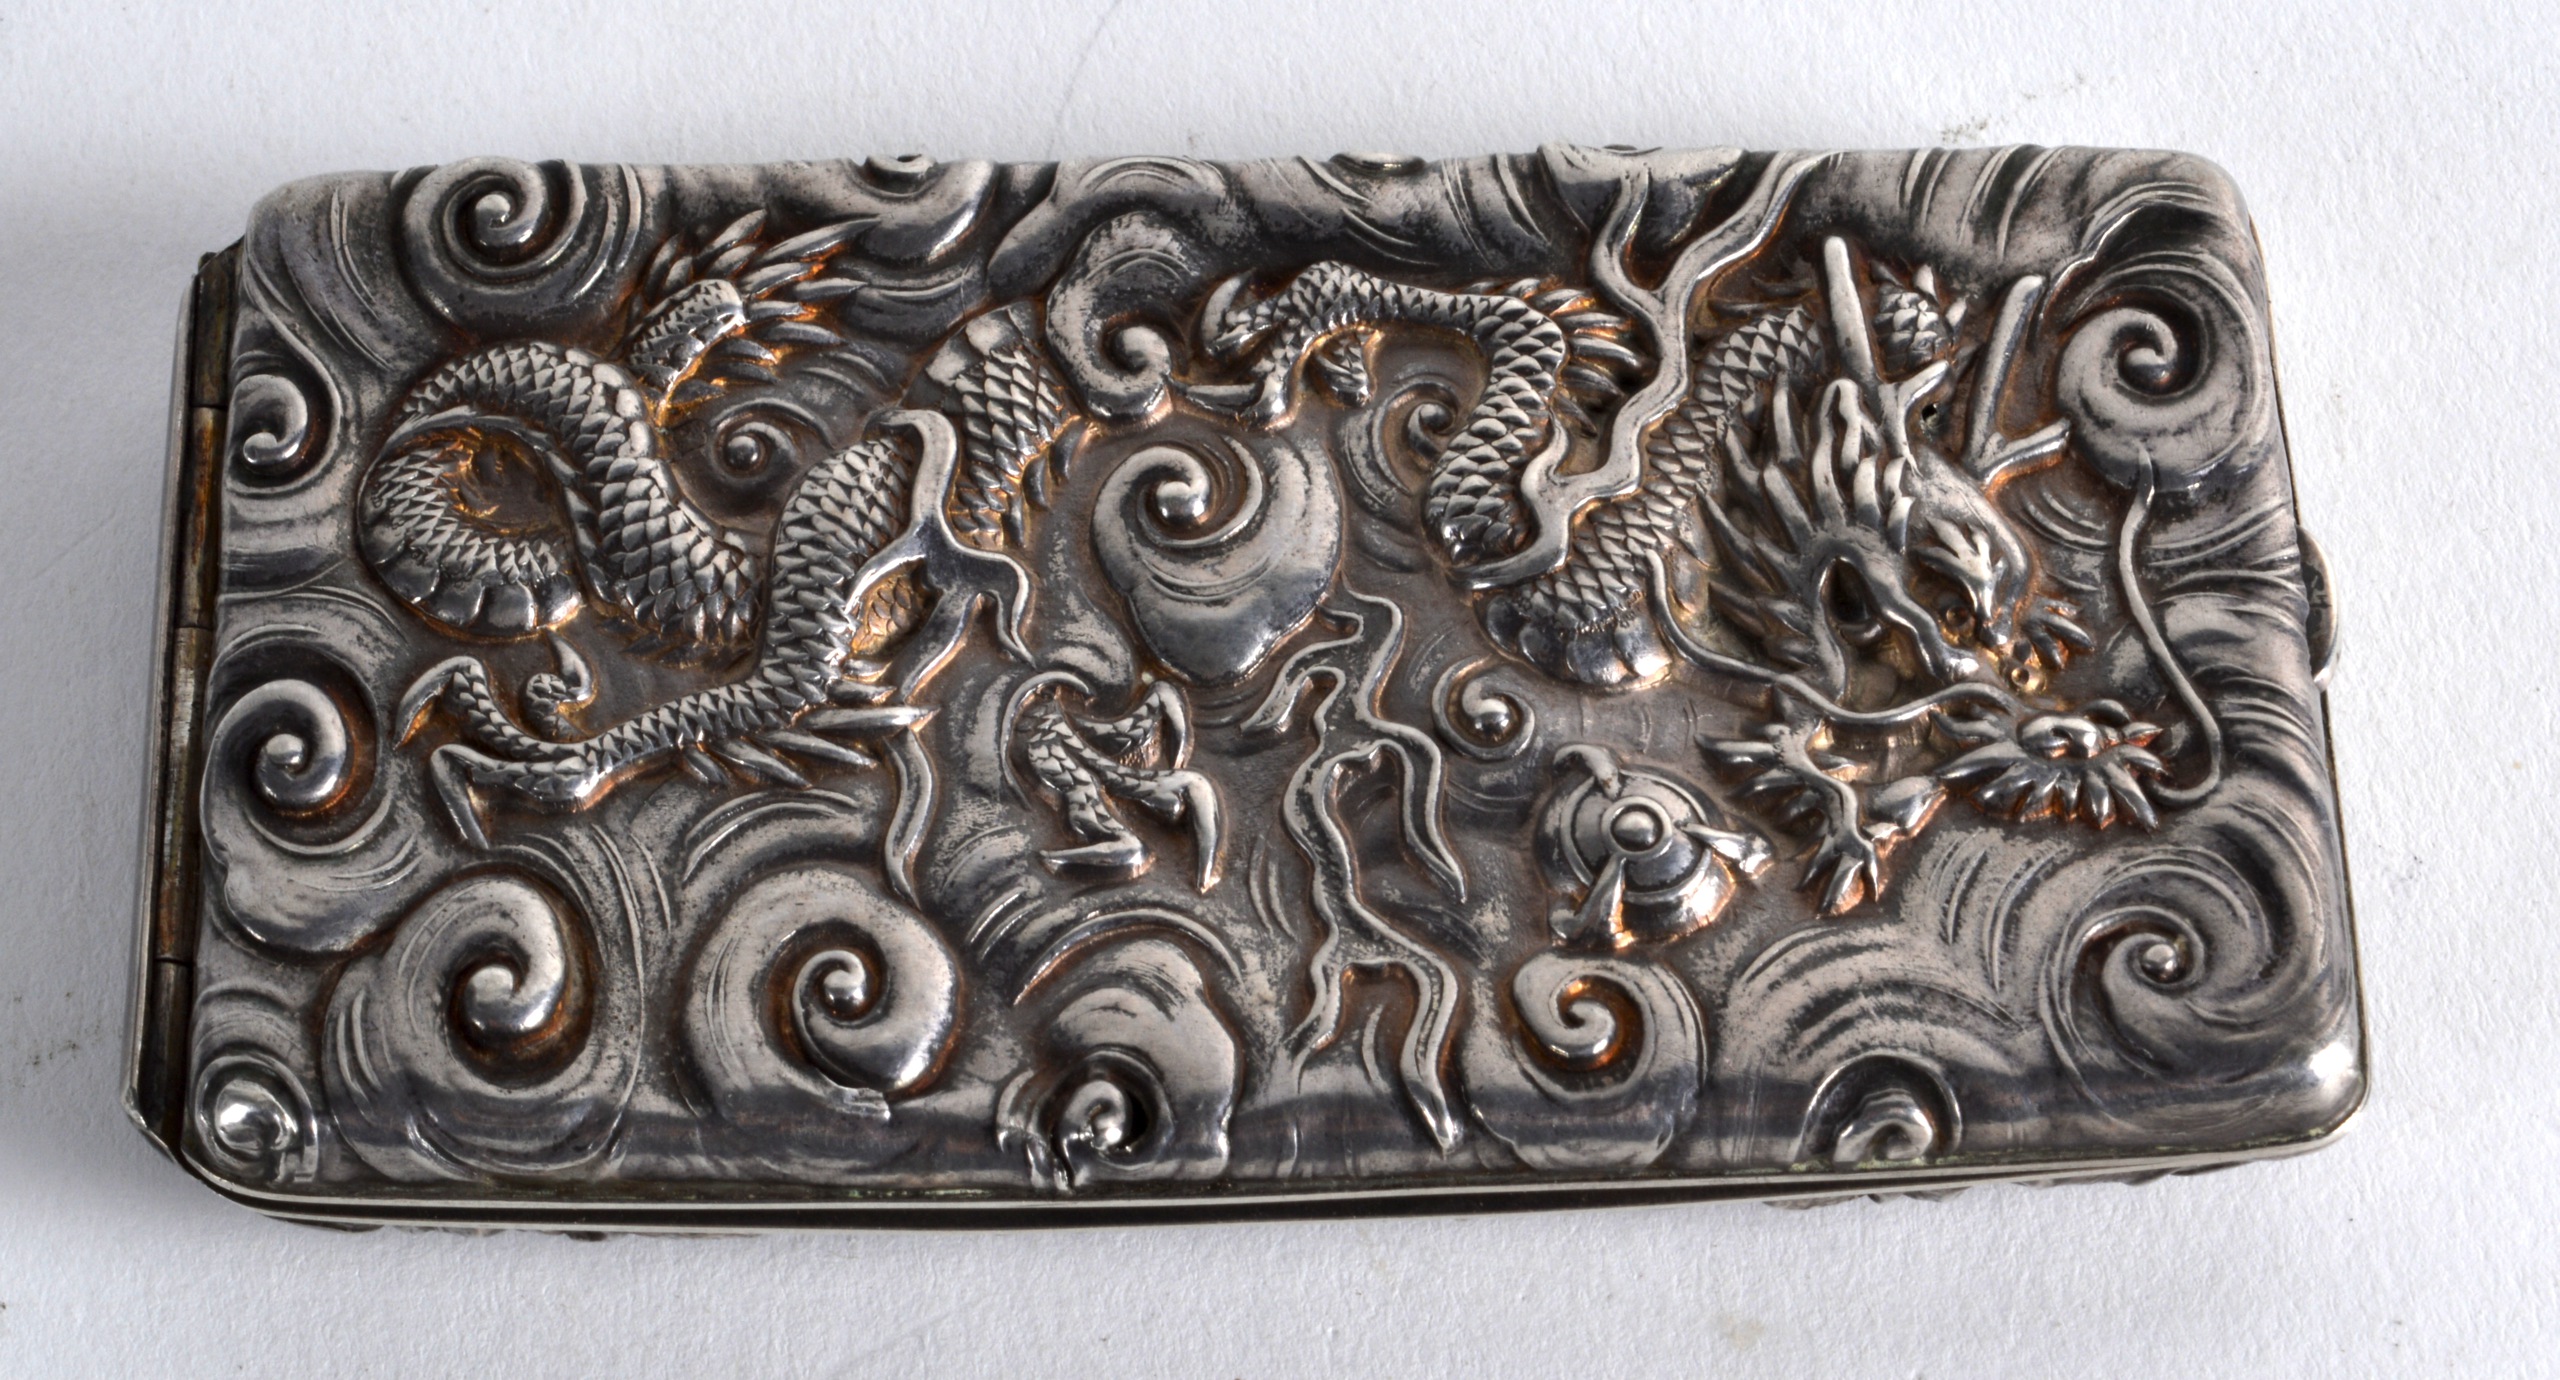 AN UNUSUAL LATE 19TH CENTURY JAPANESE MEIJI PERIOD SILVER CASE decorated in relief with dragons